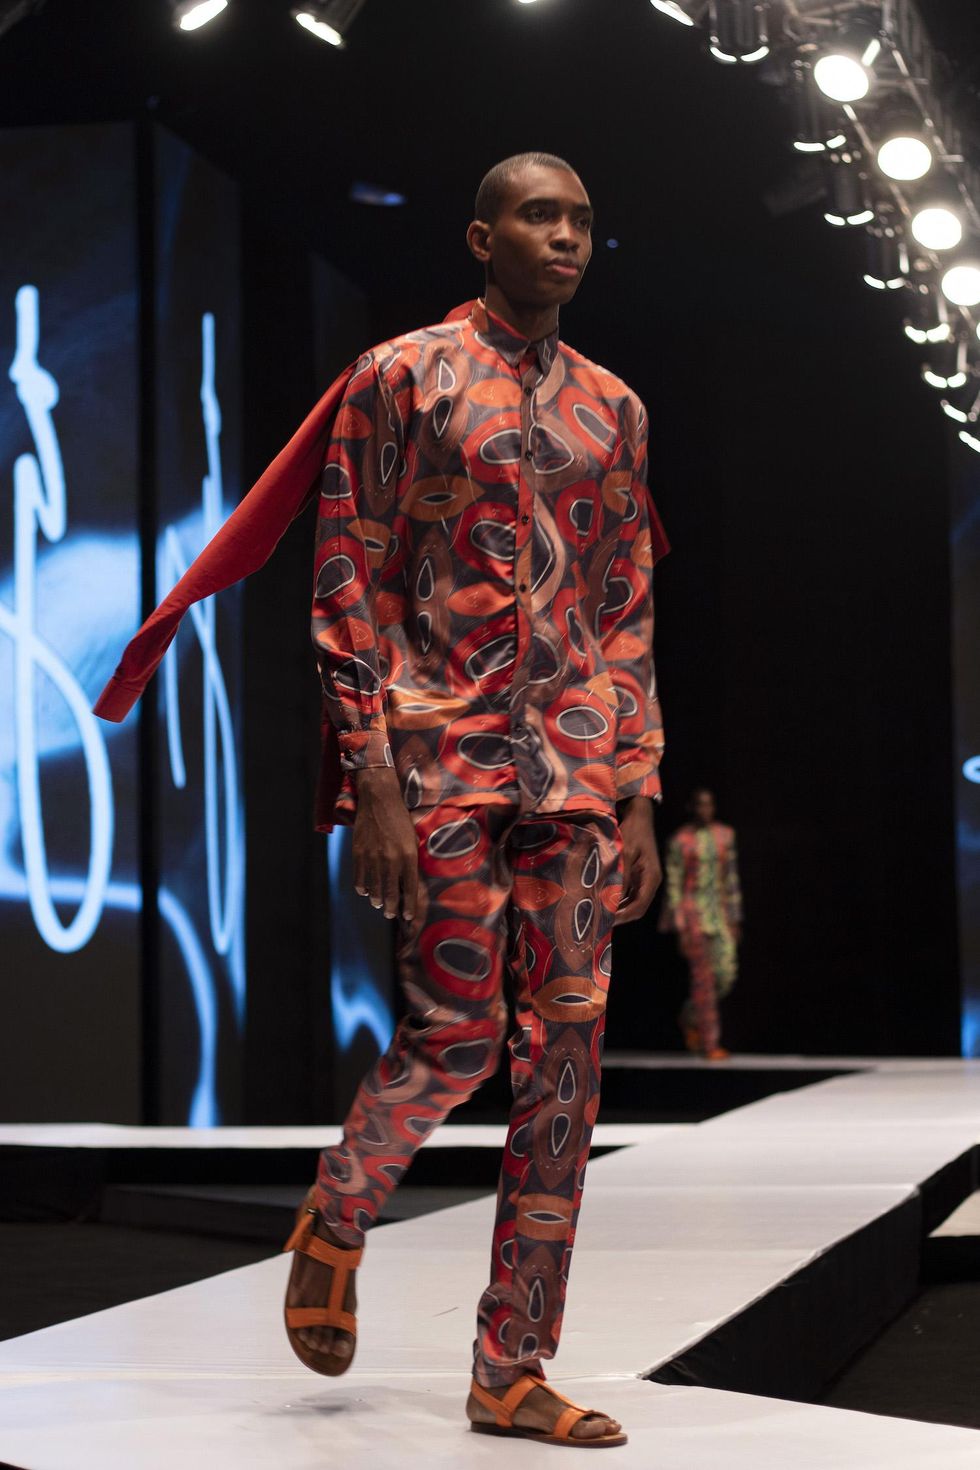  A model walks the runway for JZO